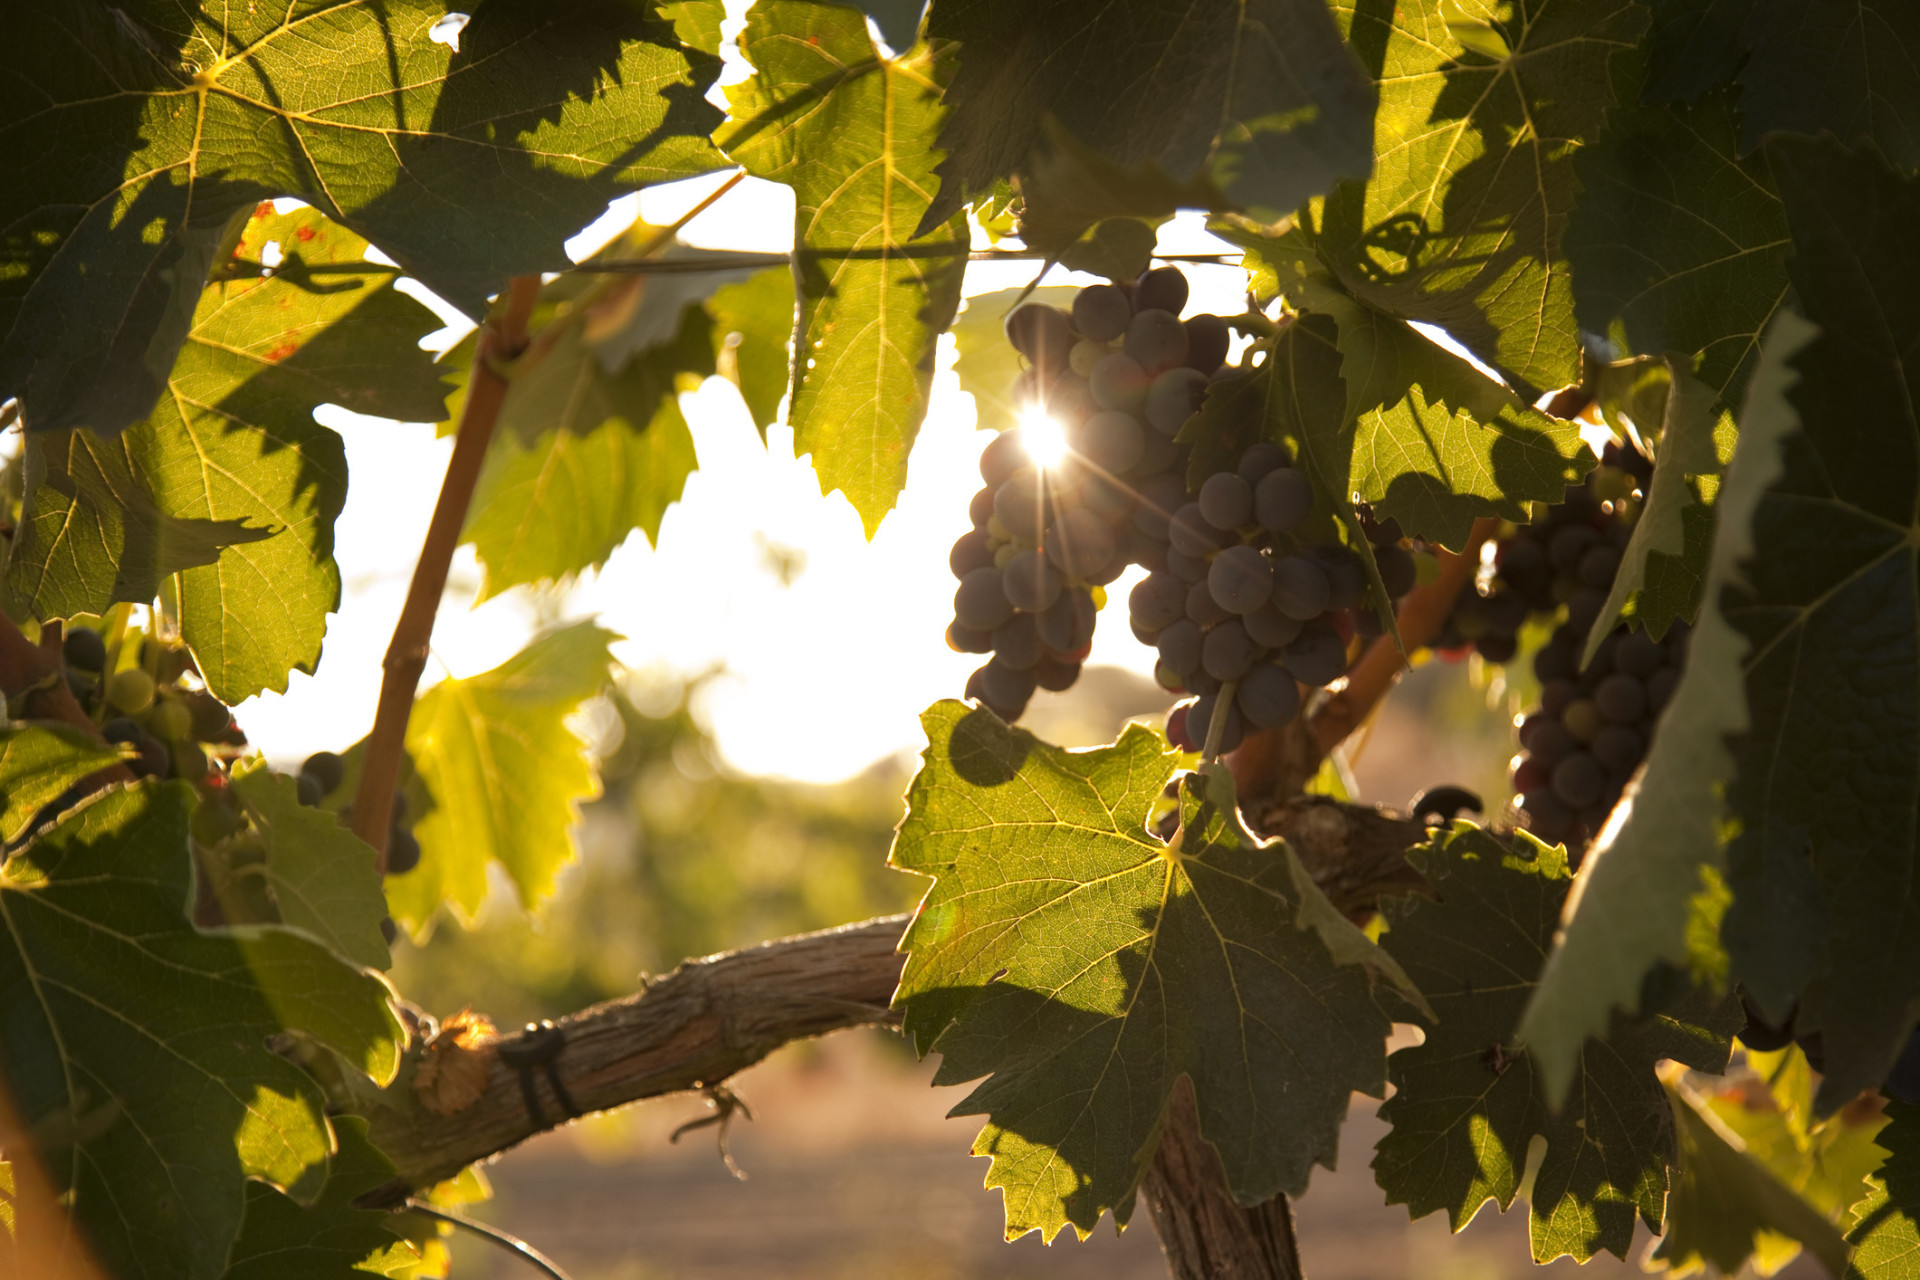 There are eight subregions to explore in this sun-soaked province. Principal grape varieties include Alicante Bouschet, Trincadeira, and Fernão Pires.<p><a href="https://www.msn.com/en-us/community/channel/vid-7xx8mnucu55yw63we9va2gwr7uihbxwc68fxqp25x6tg4ftibpra?cvid=94631541bc0f4f89bfd59158d696ad7e">Follow us and access great exclusive content every day</a></p>